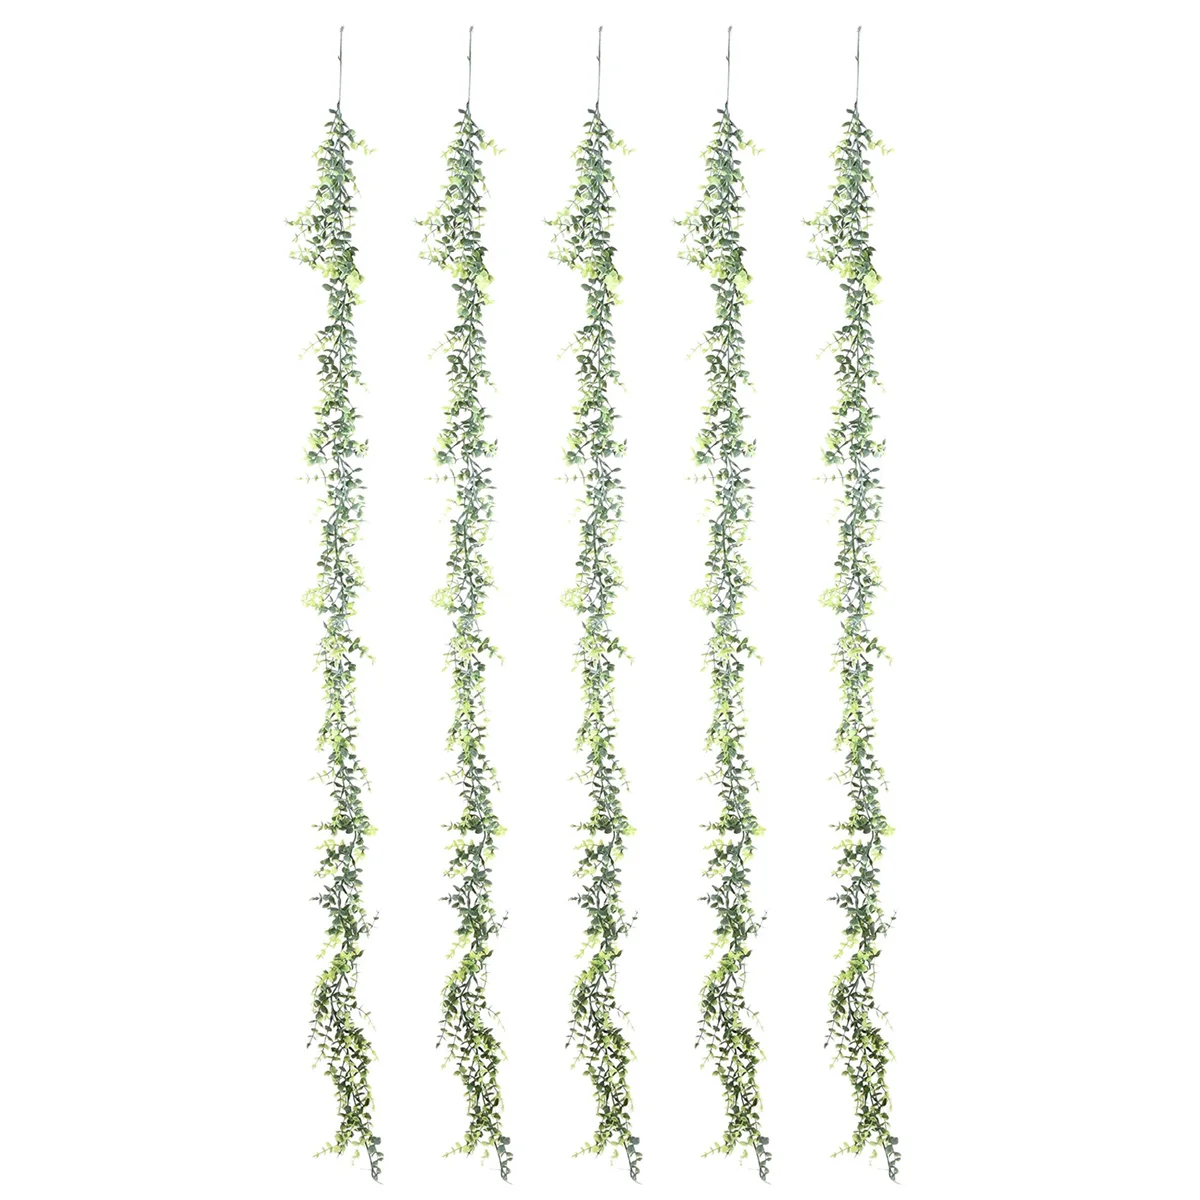 

5 Packs 30Ft Artificial Eucalyptus Garlands Fake Greenery Vines Faux Hanging Plants for Wedding Table Backdrop Arch